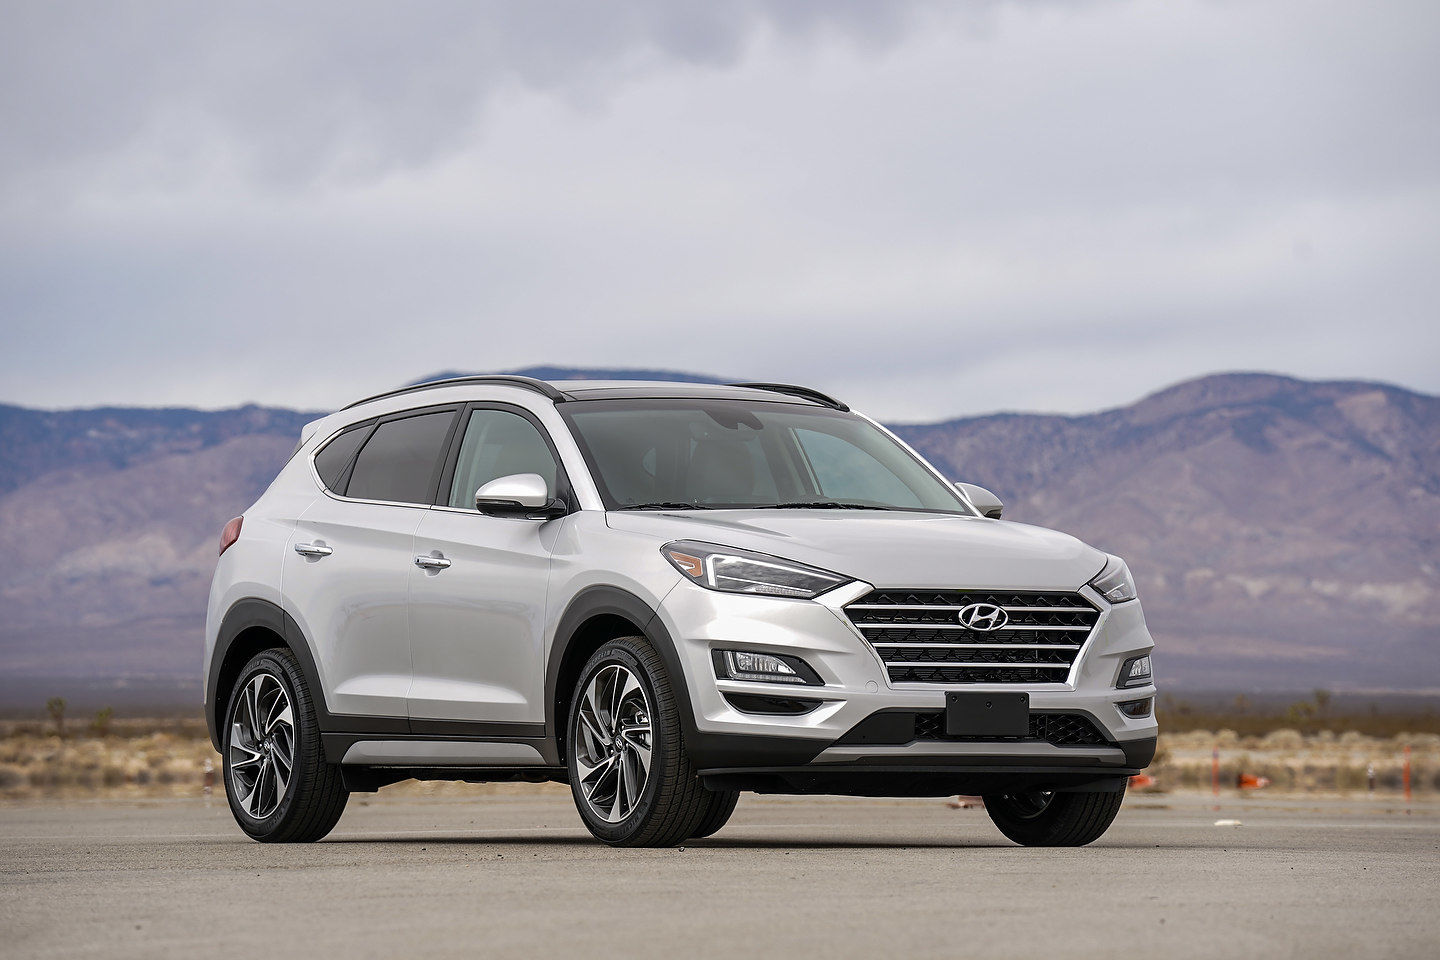 Three reasons to buy a certified pre-owned Hyundai vehicle